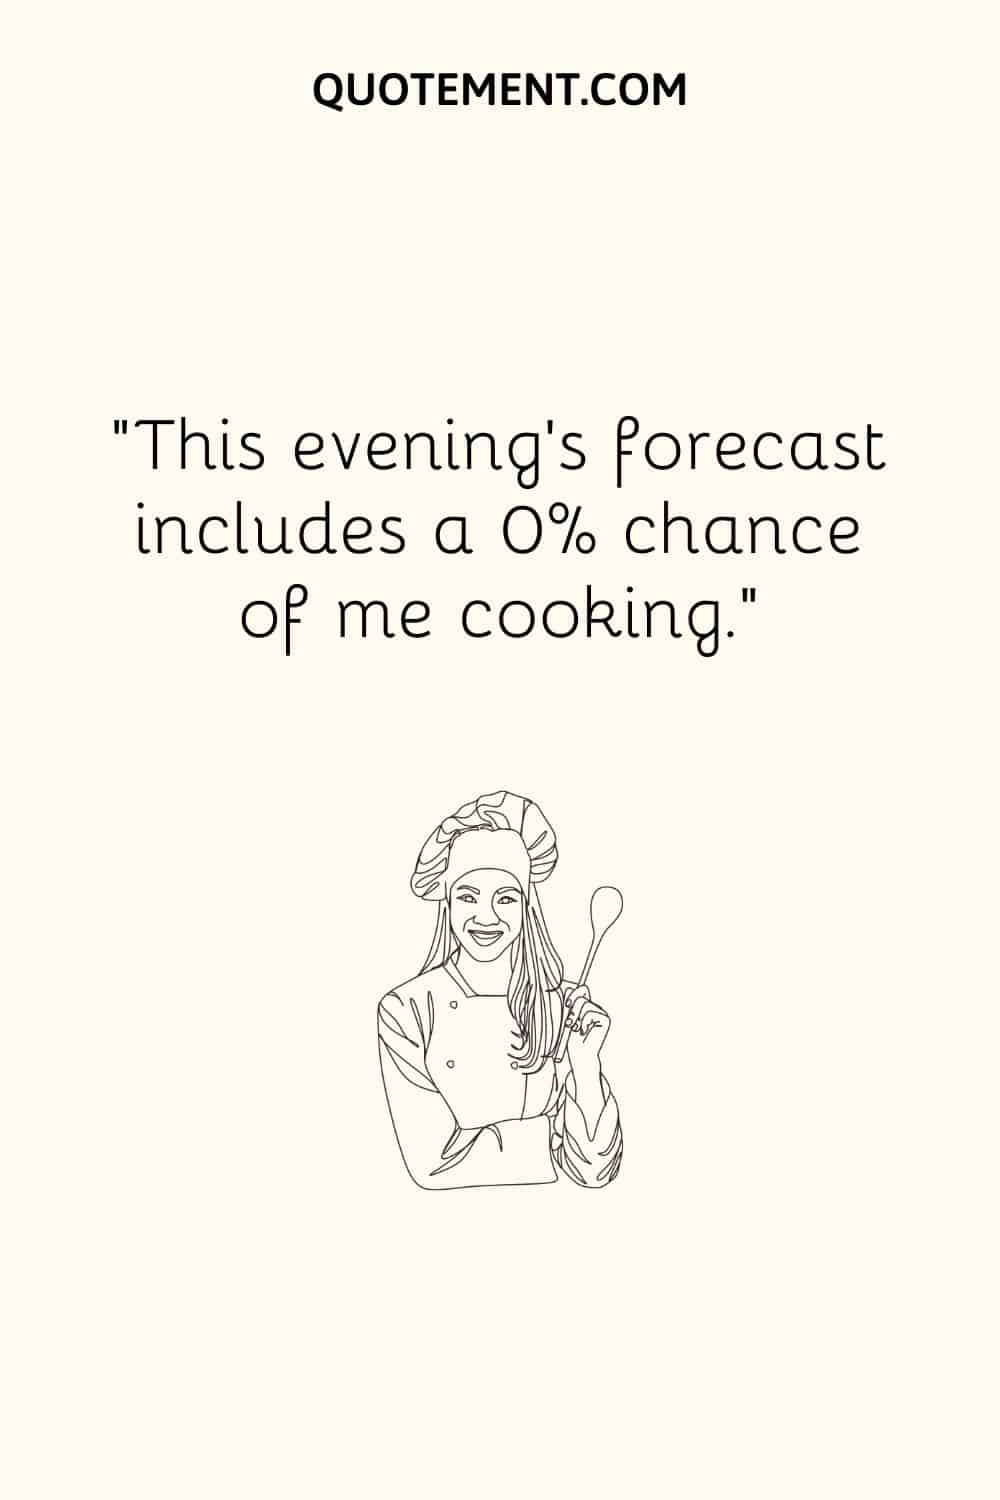 This evening’s forecast includes a 0% chance of me cooking